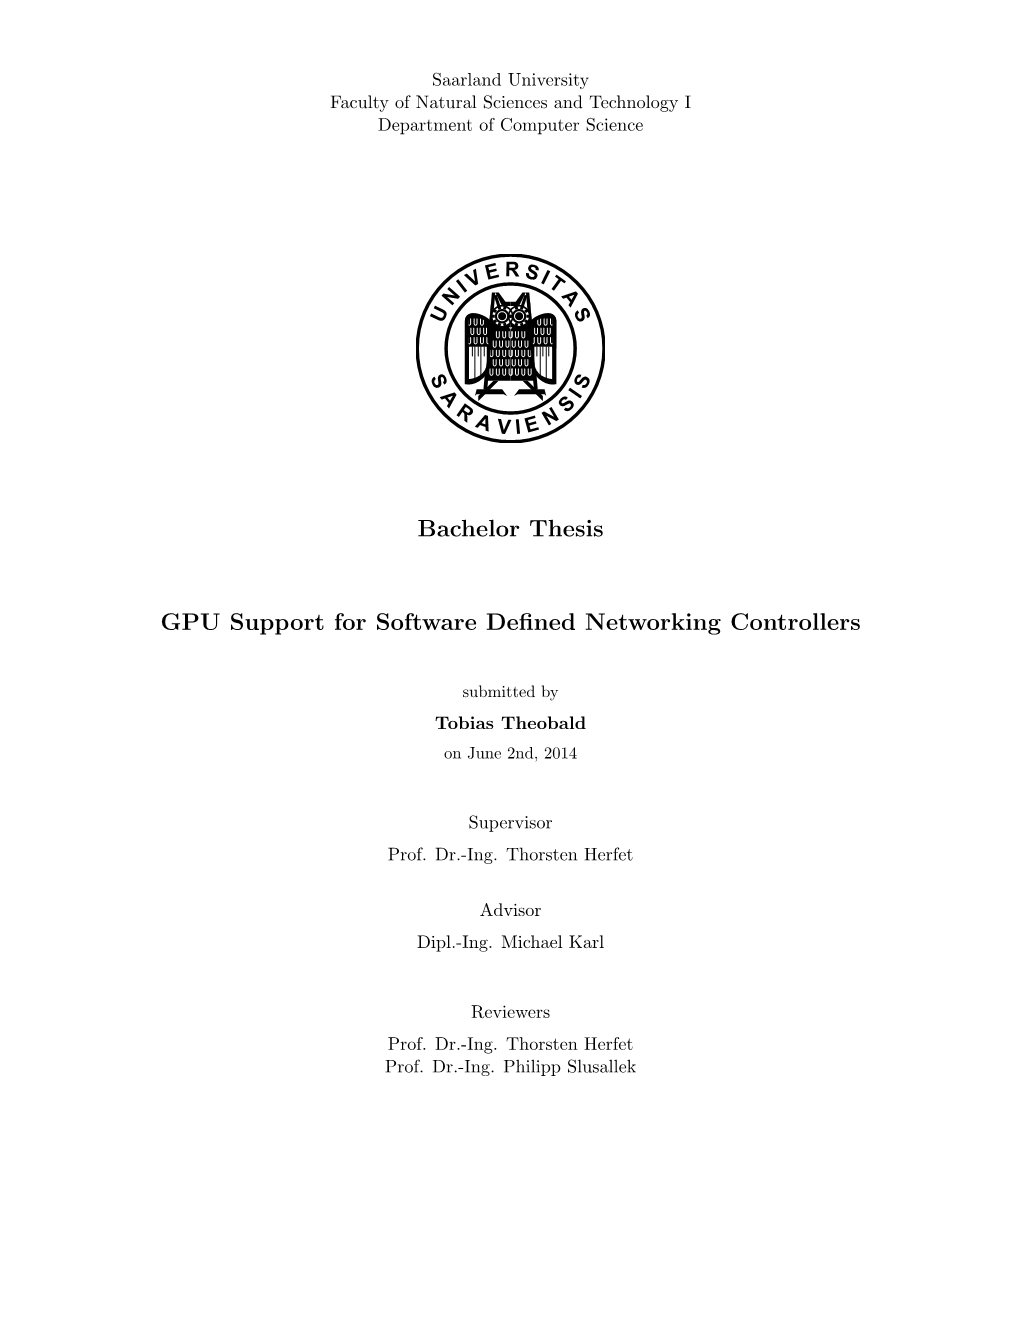 Bachelor Thesis GPU Support for Software Defined Networking